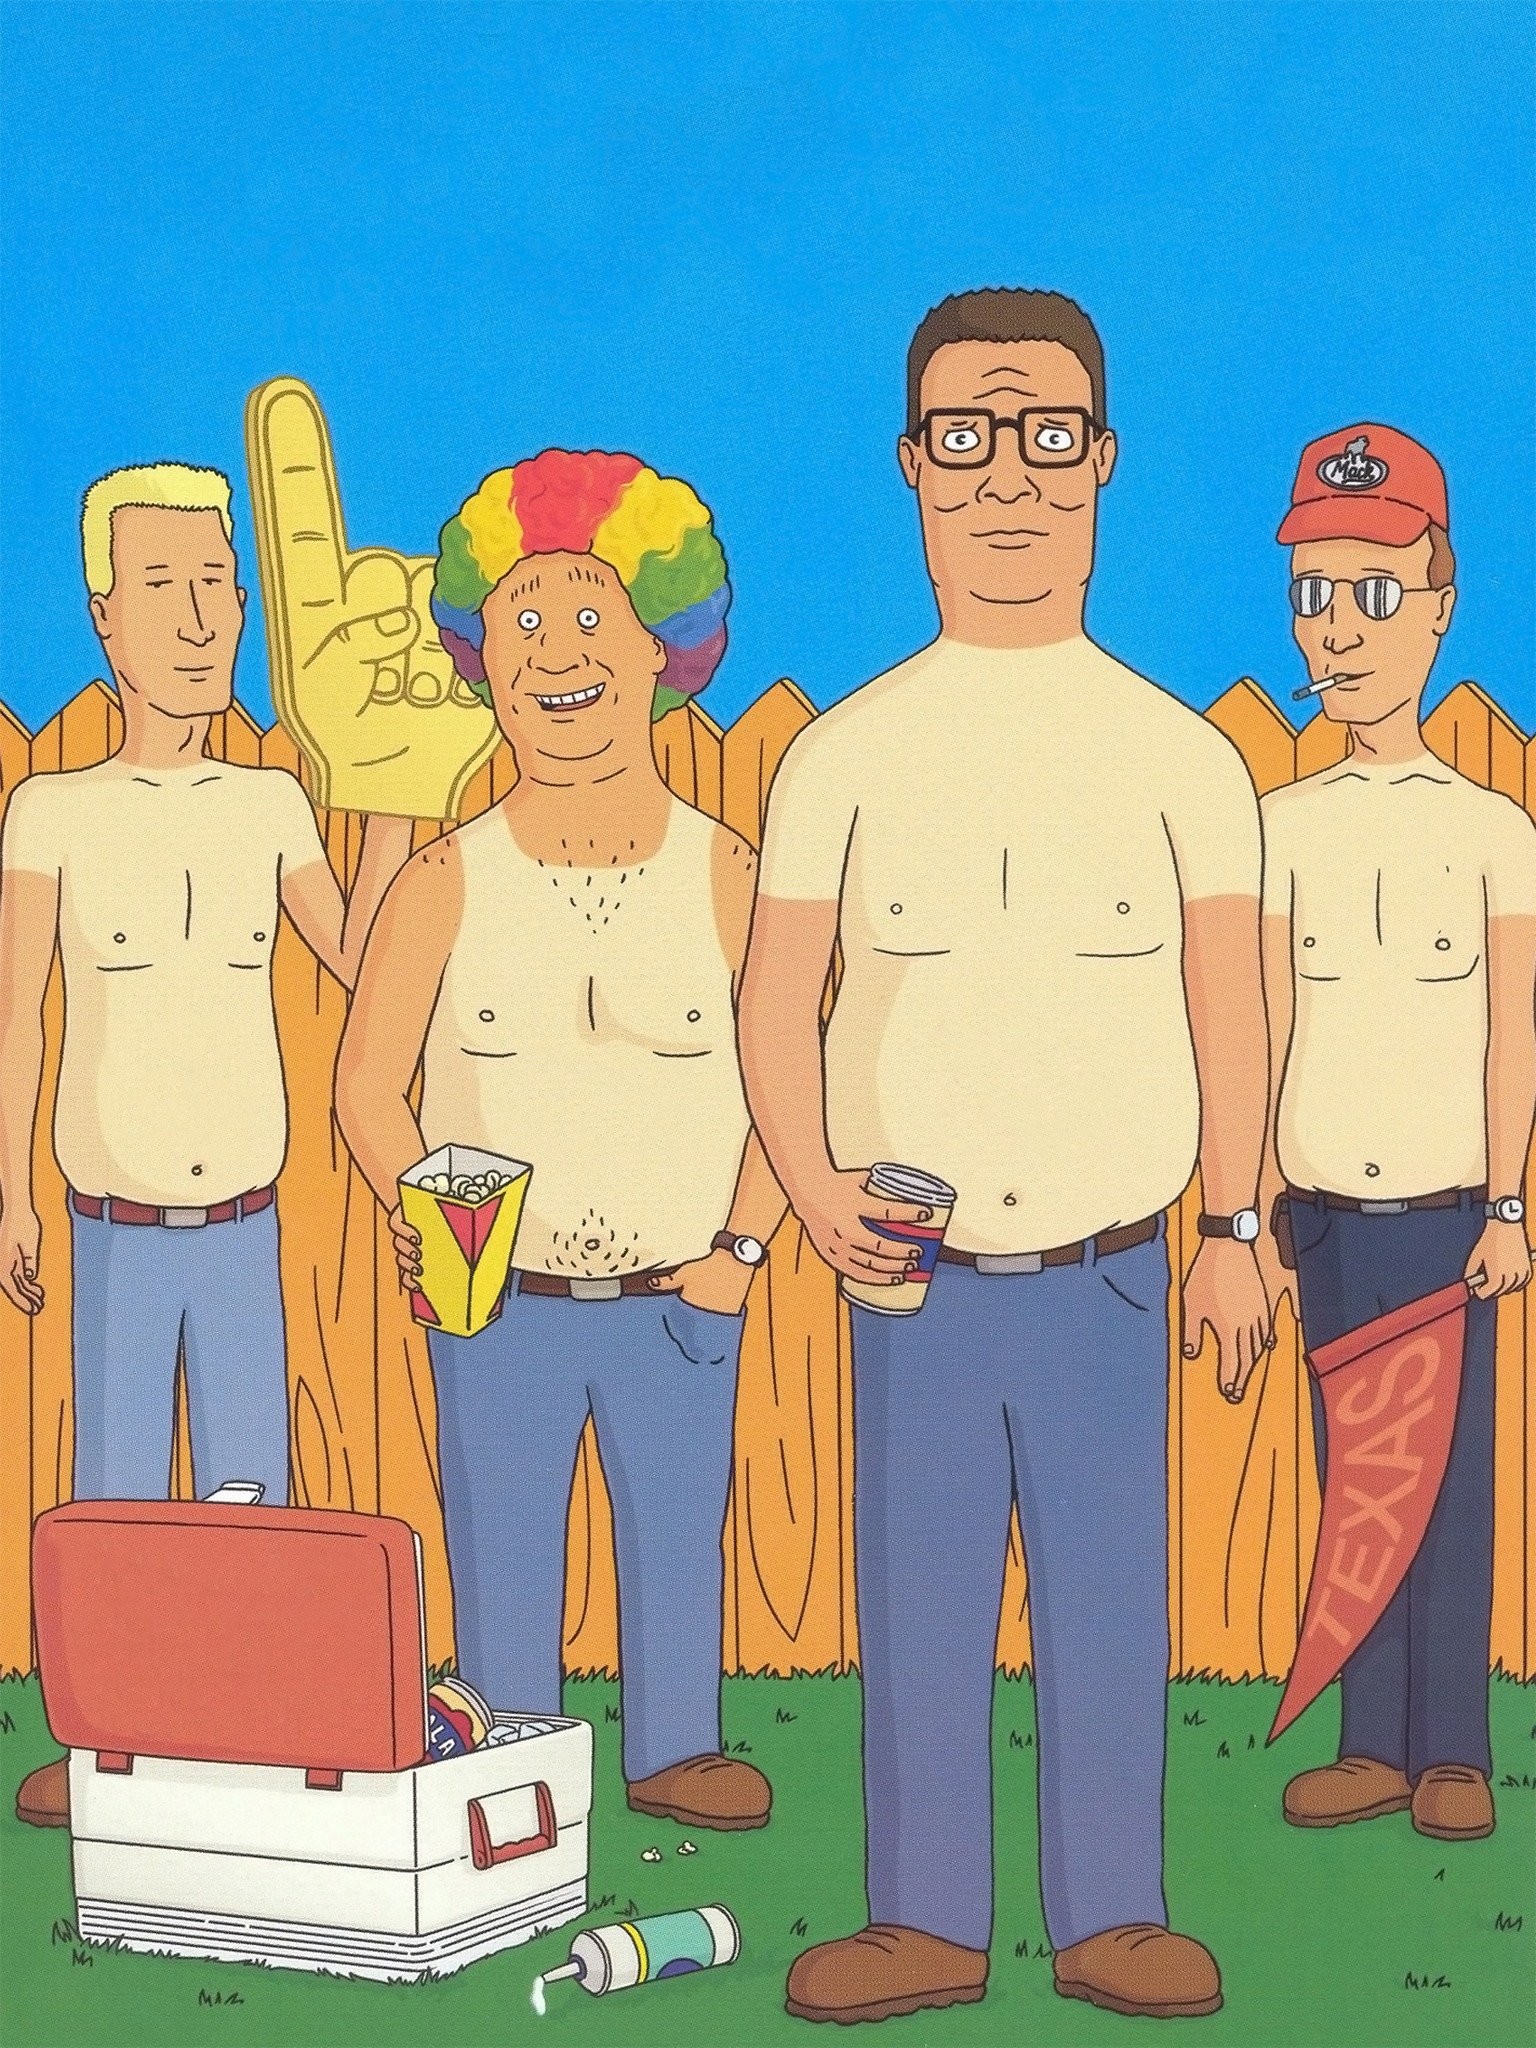 Luanne Platter (King of the Hill) - Incredible Characters Wiki